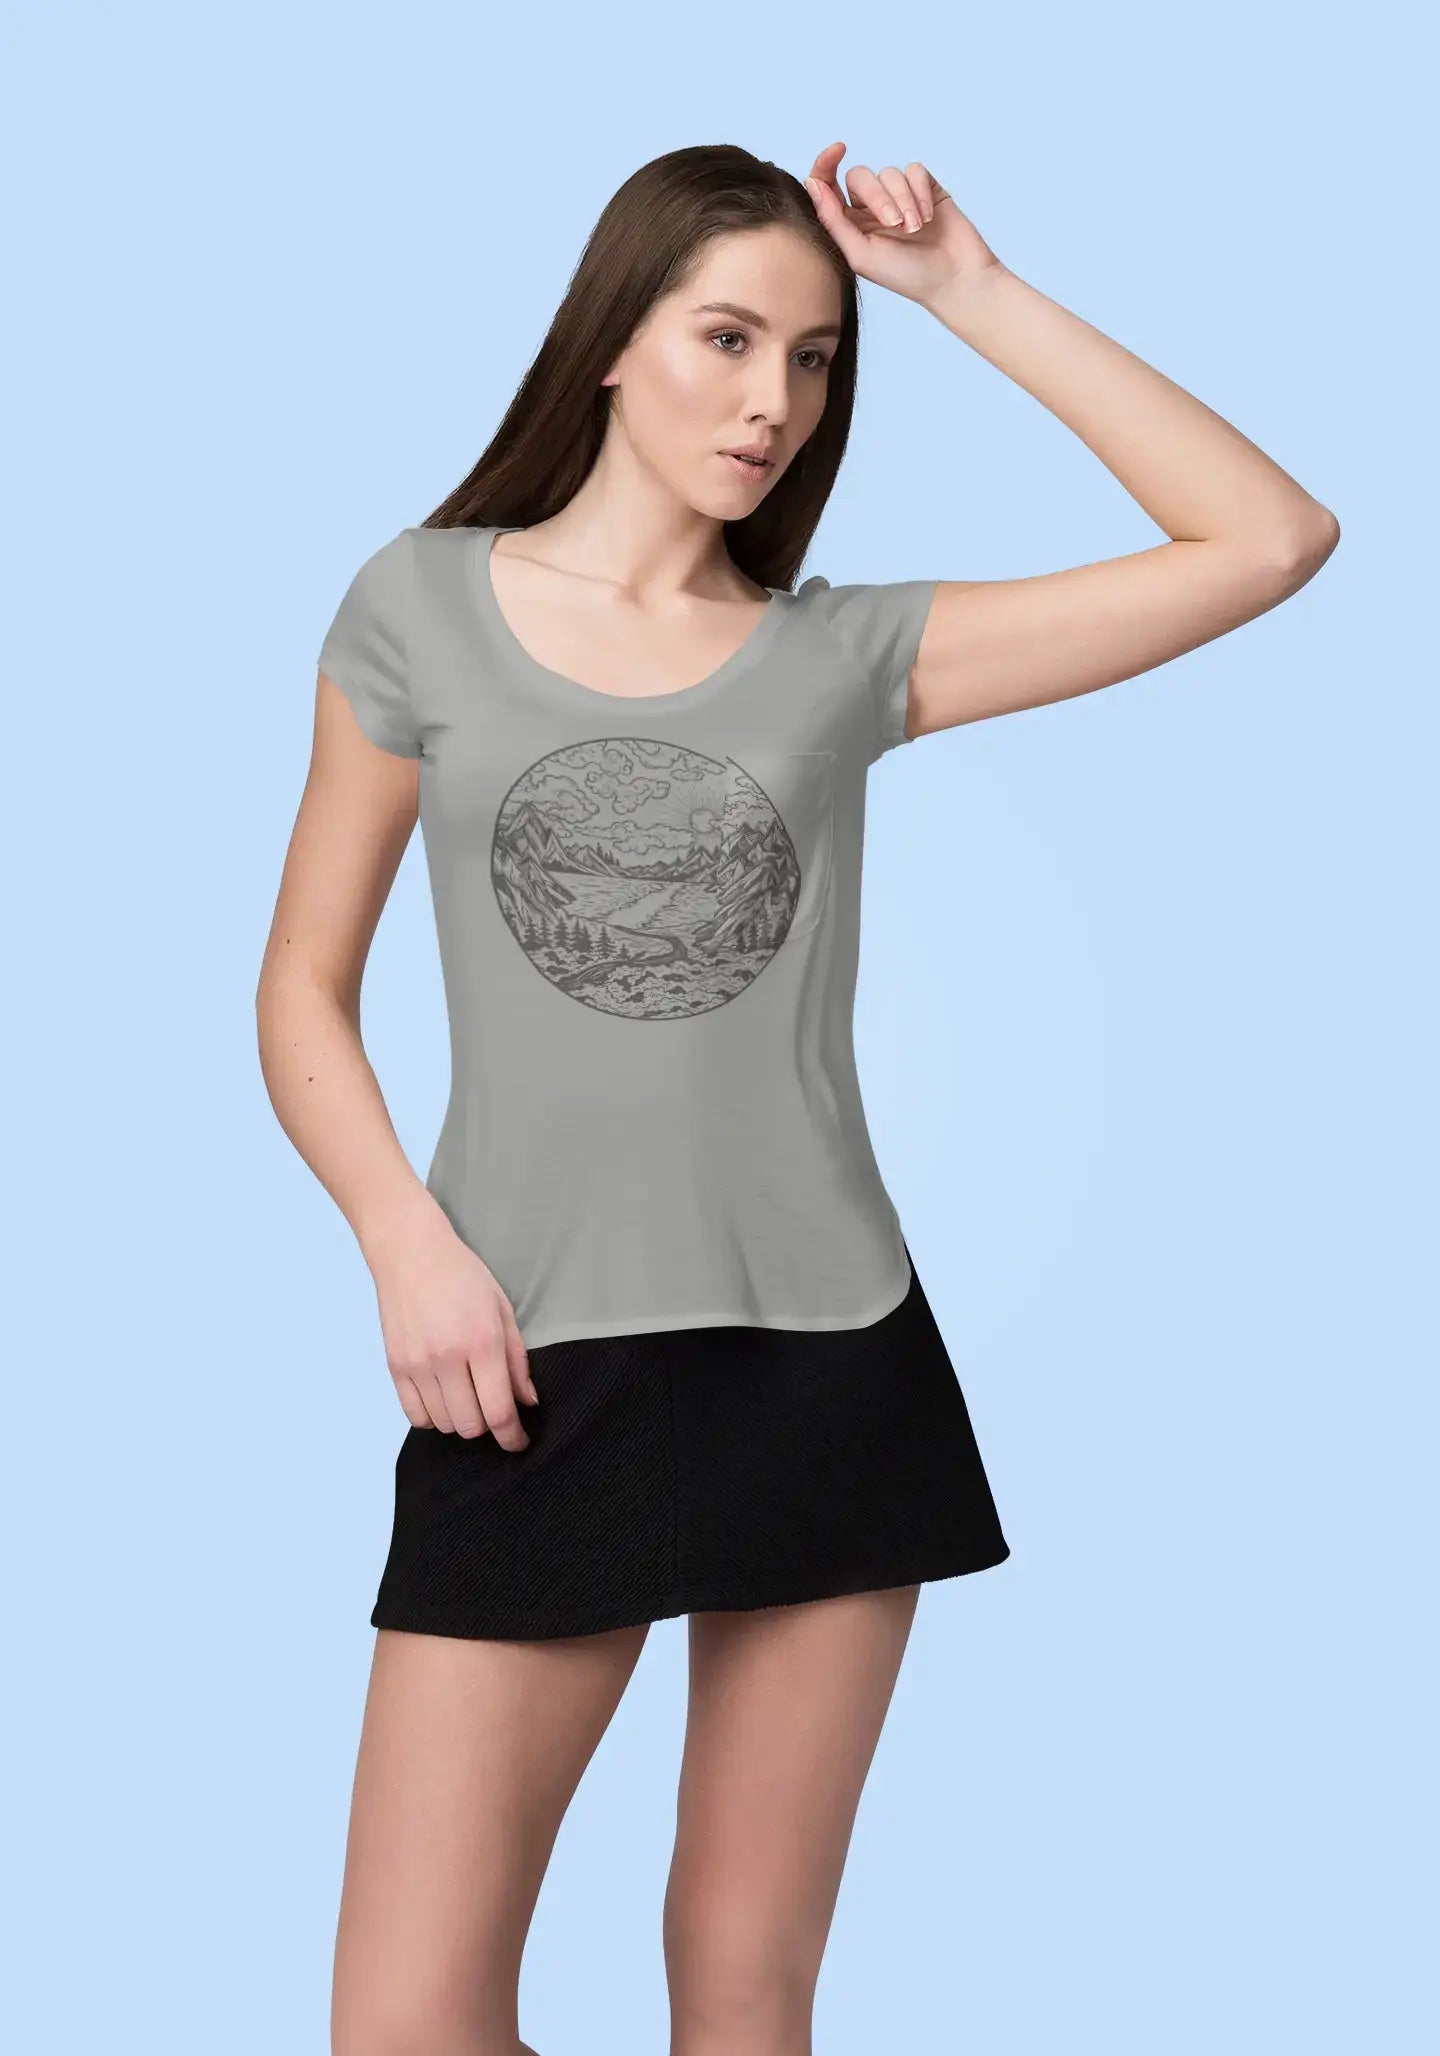 ULTRABASIC - Graphic Printed Women's River Mountain and Forest T-Shirt White